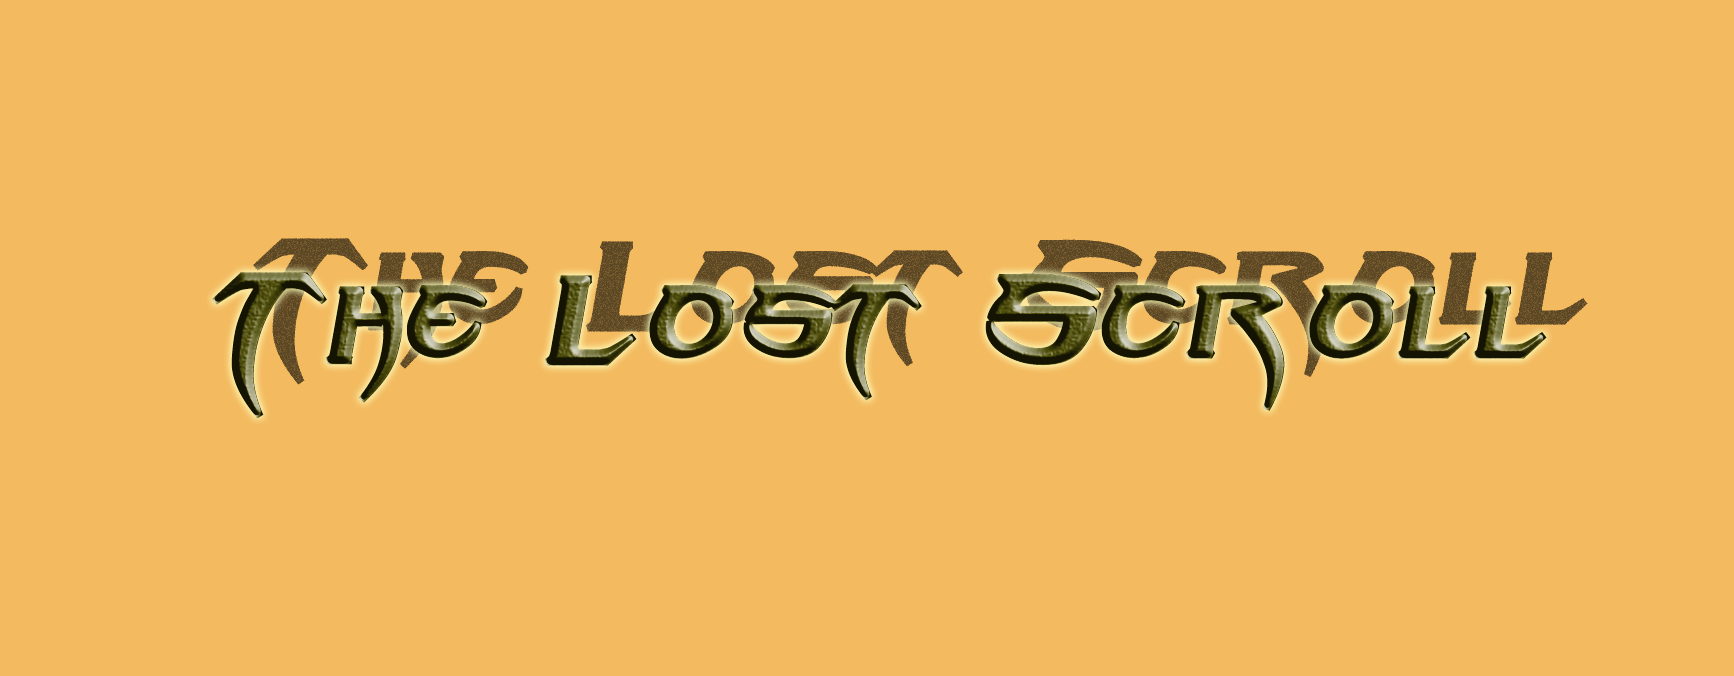 the lost scroll logo